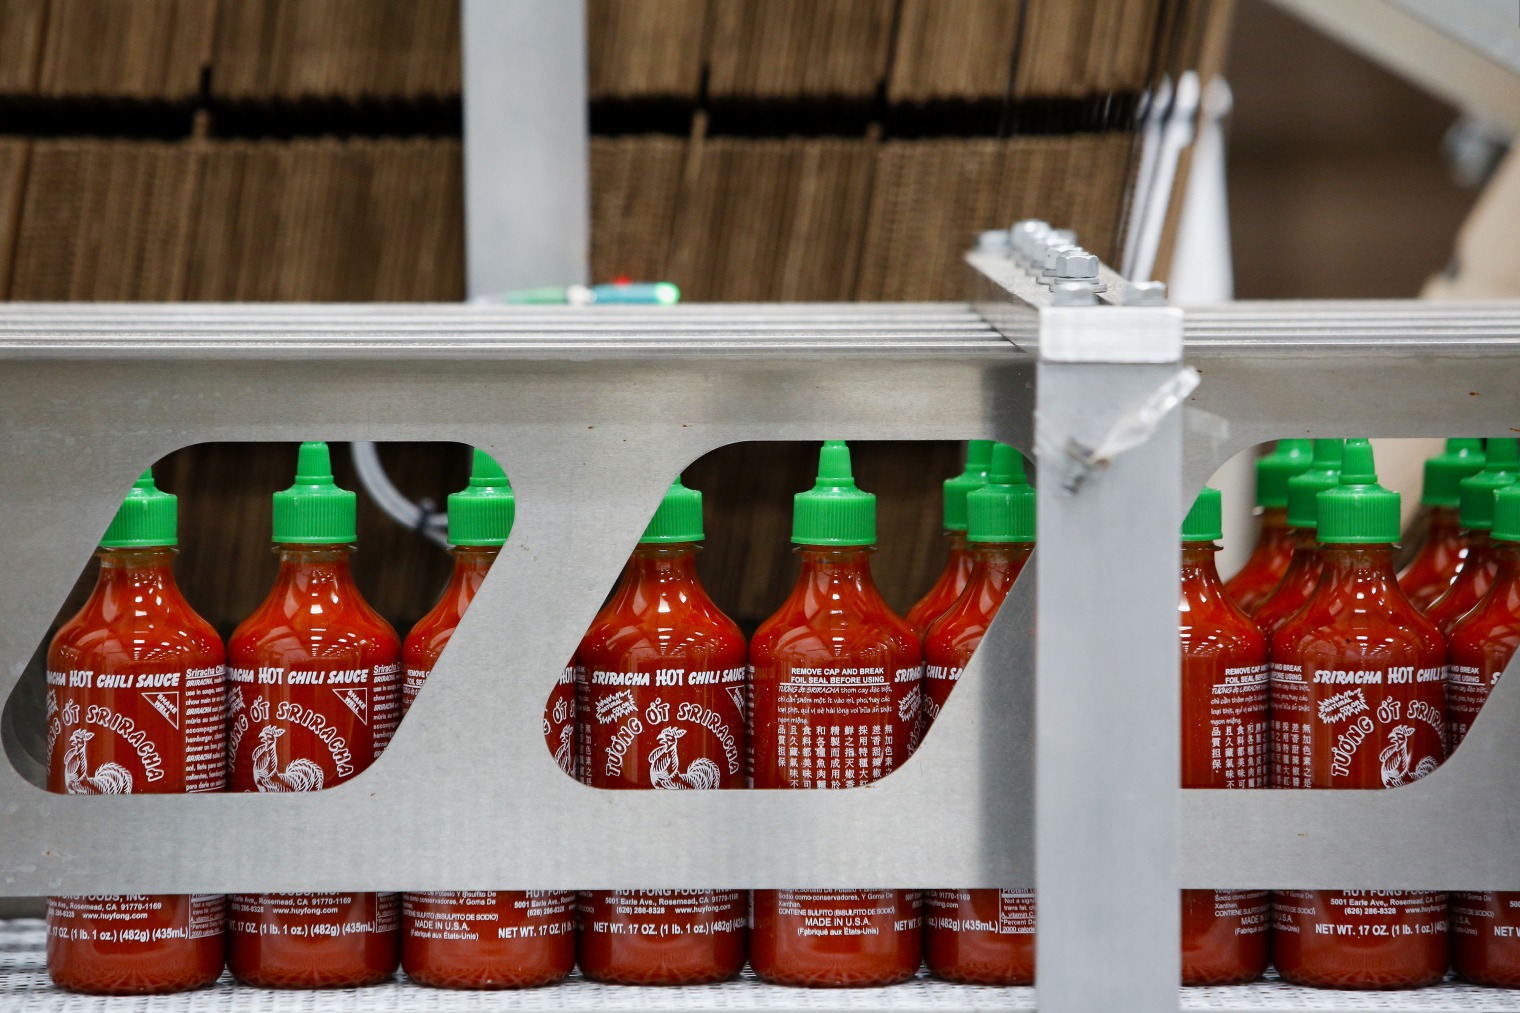 Sriracha hot sauce at Huy Fong Foods facility in Irwindale.